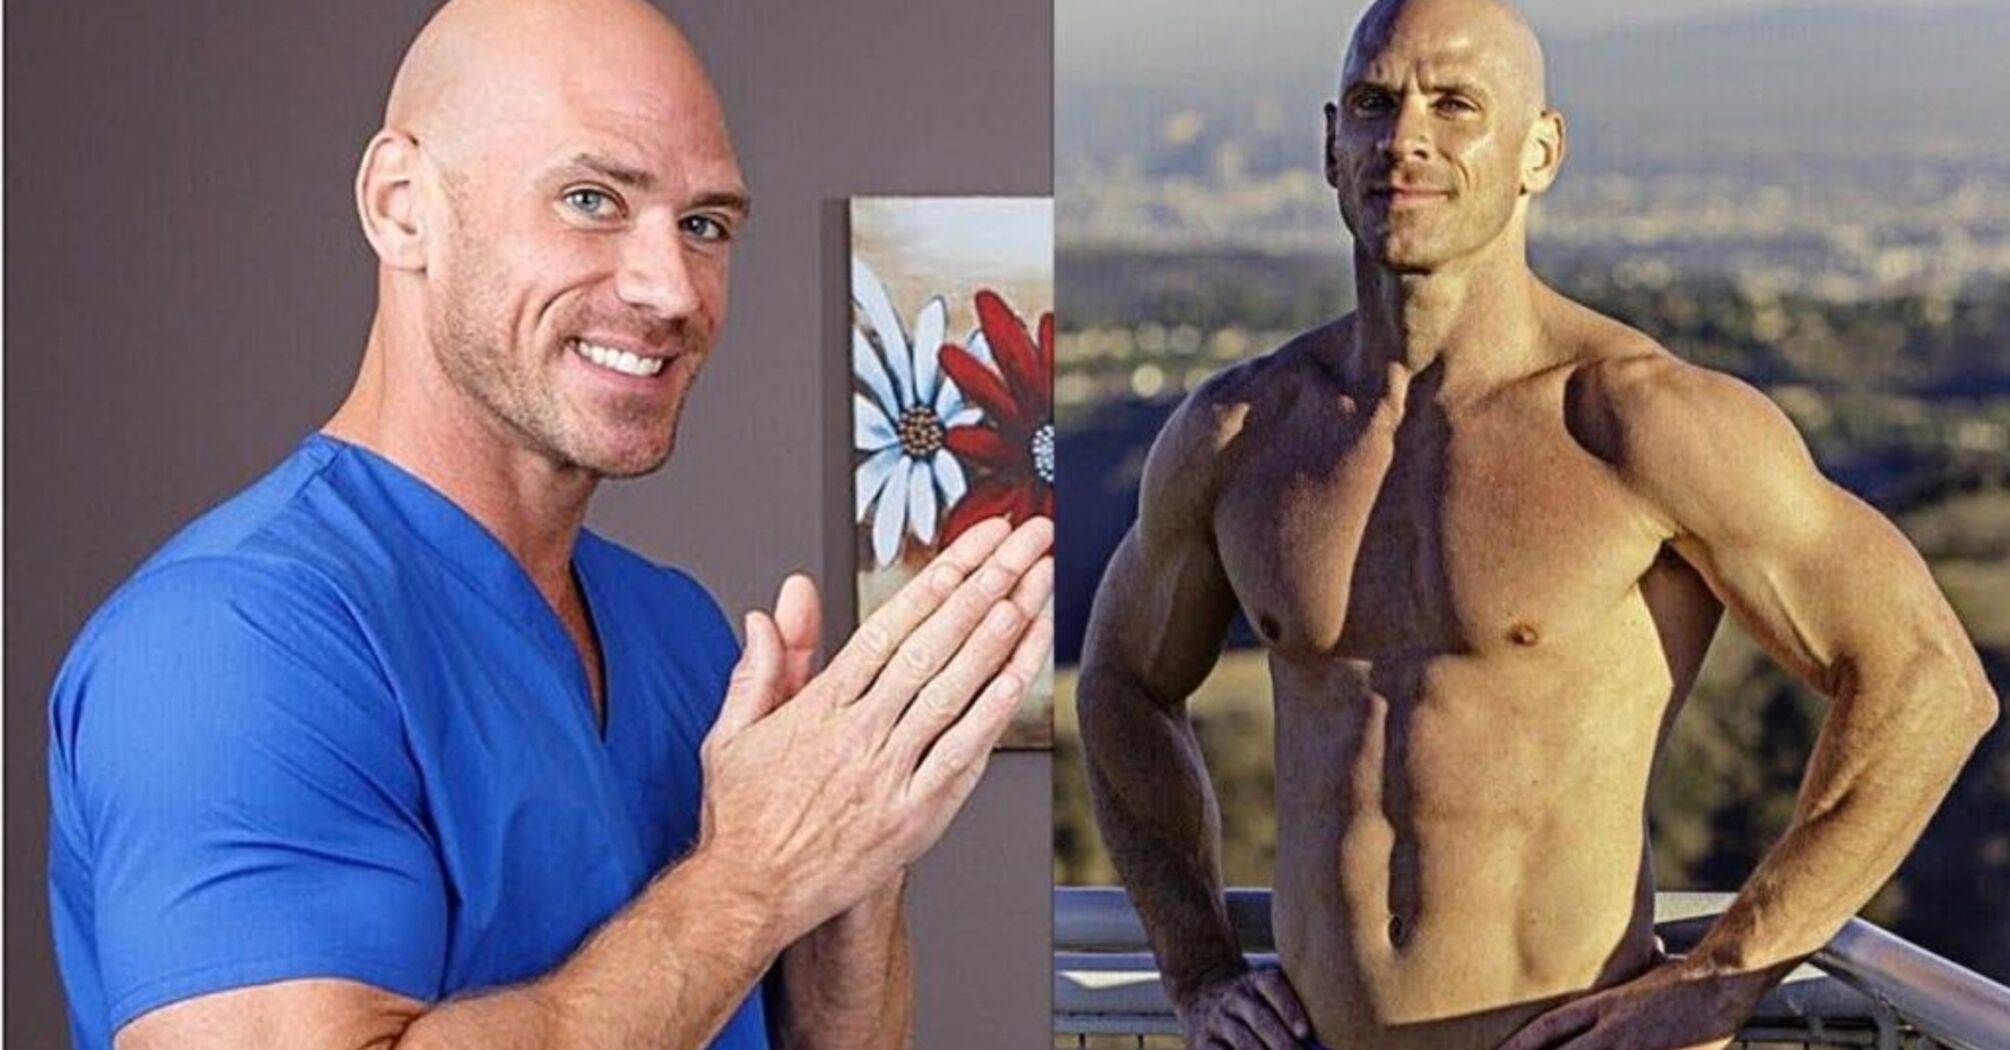 Famous porn actor Johnny Sins spoke openly about the challenges in his personal life